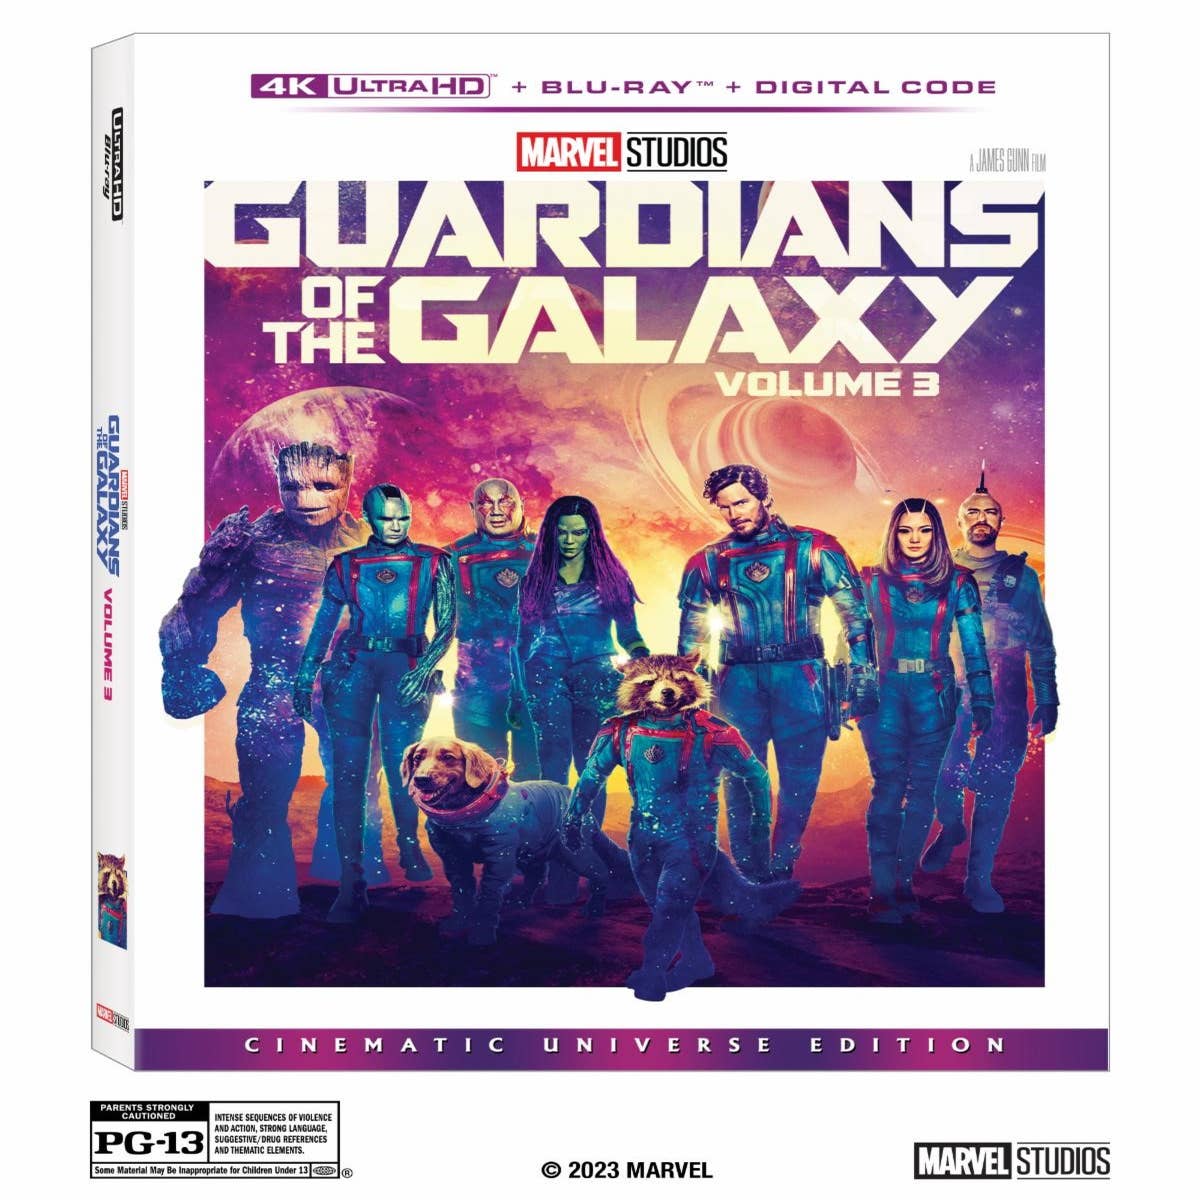 Guardians Vol. 3: When can you buy it, stream it, or Disney+ it?